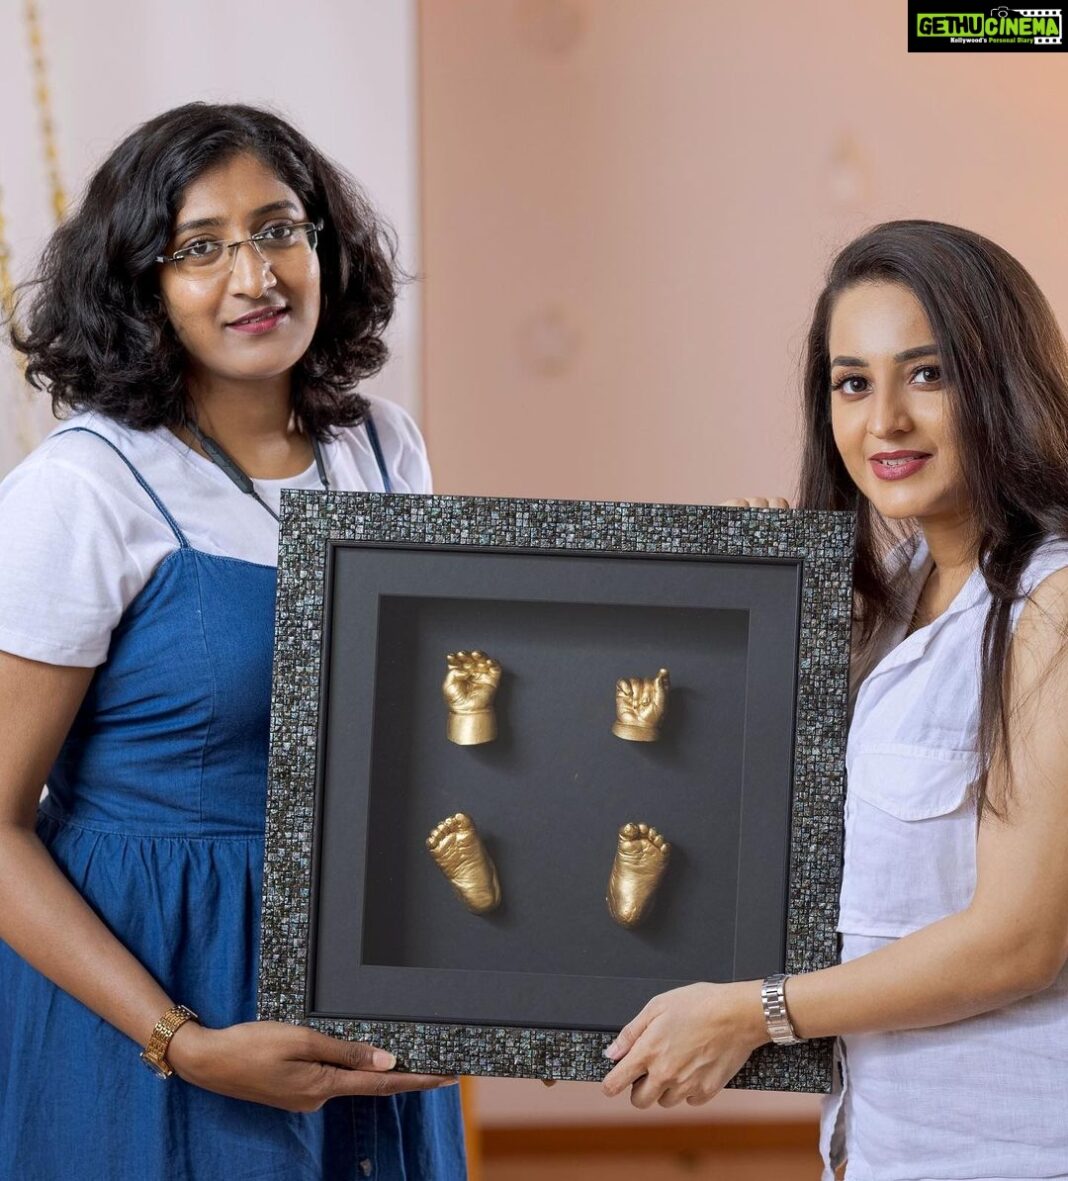 Bhama Instagram - Our life got a lot brighter with the arrival of our baby... I felt my whole world change when I held her in my arms for the first time! 🤱 I'm saving some of those precious memories to show her when she grows up🥰 #Impressions.. the replicas of my baby’s hands n feet preserved in a frame.. for a lifetime...!! Definitely this is something unique. She can touch her own tiny hands n feet in the future☺️ Thankyou @anila_impressions_and_frames for this token of love❤️😇 #December Baby 👶 #2020 Kochi, India